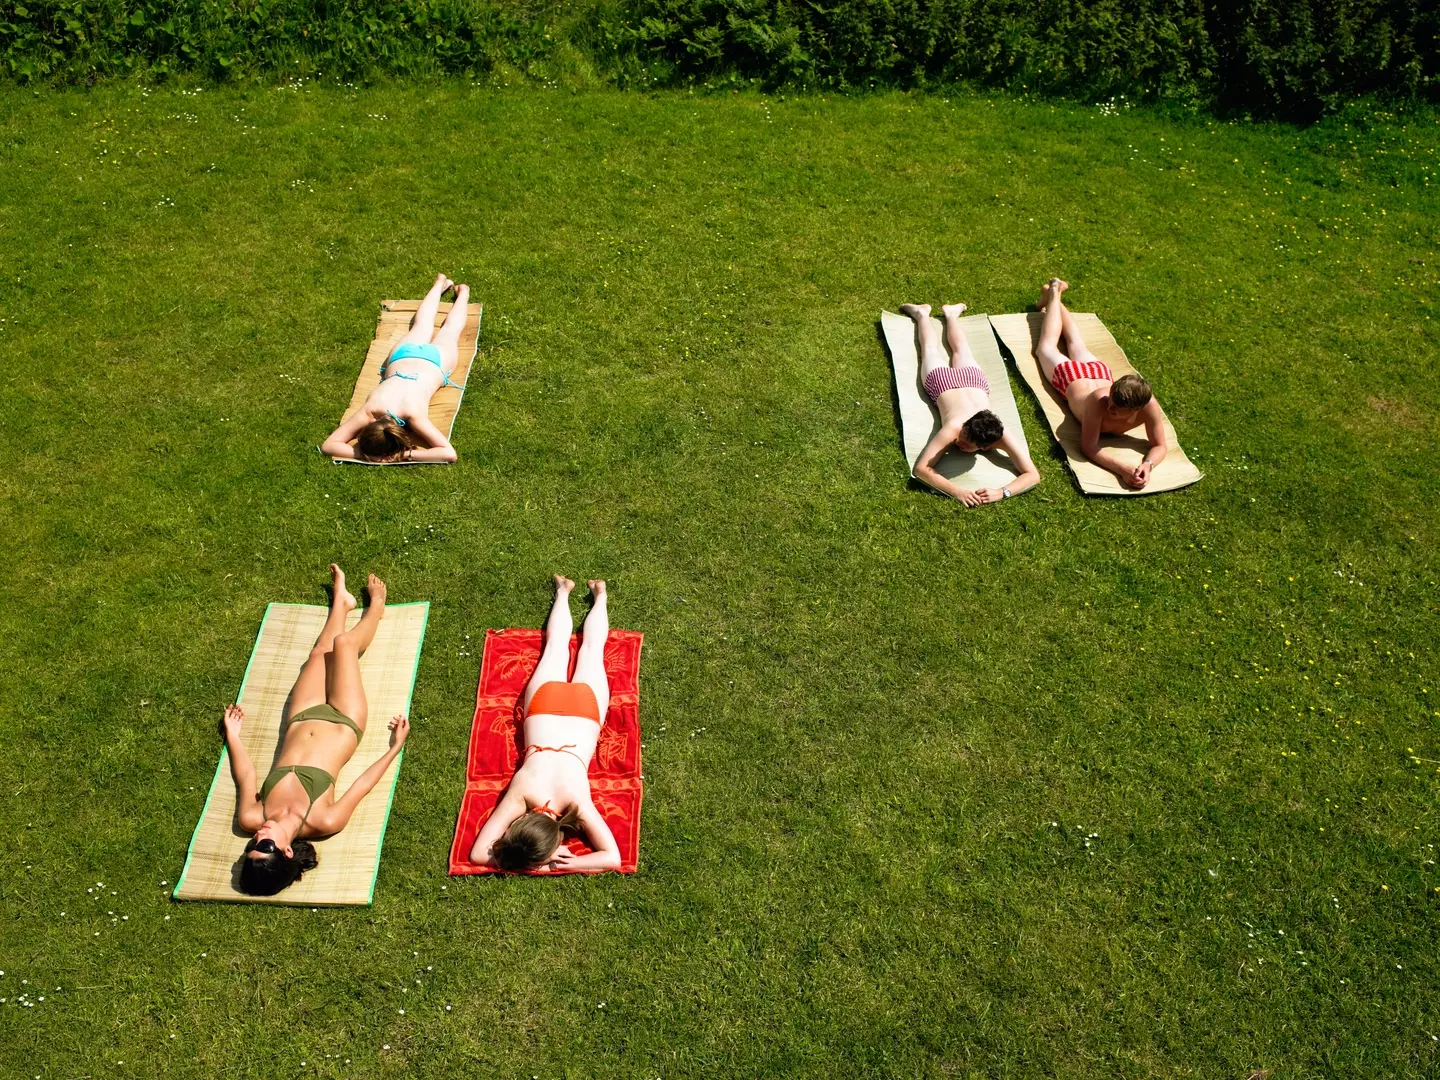 Police have issued a warning to people planning on sunbathing naked in their garden this summer.